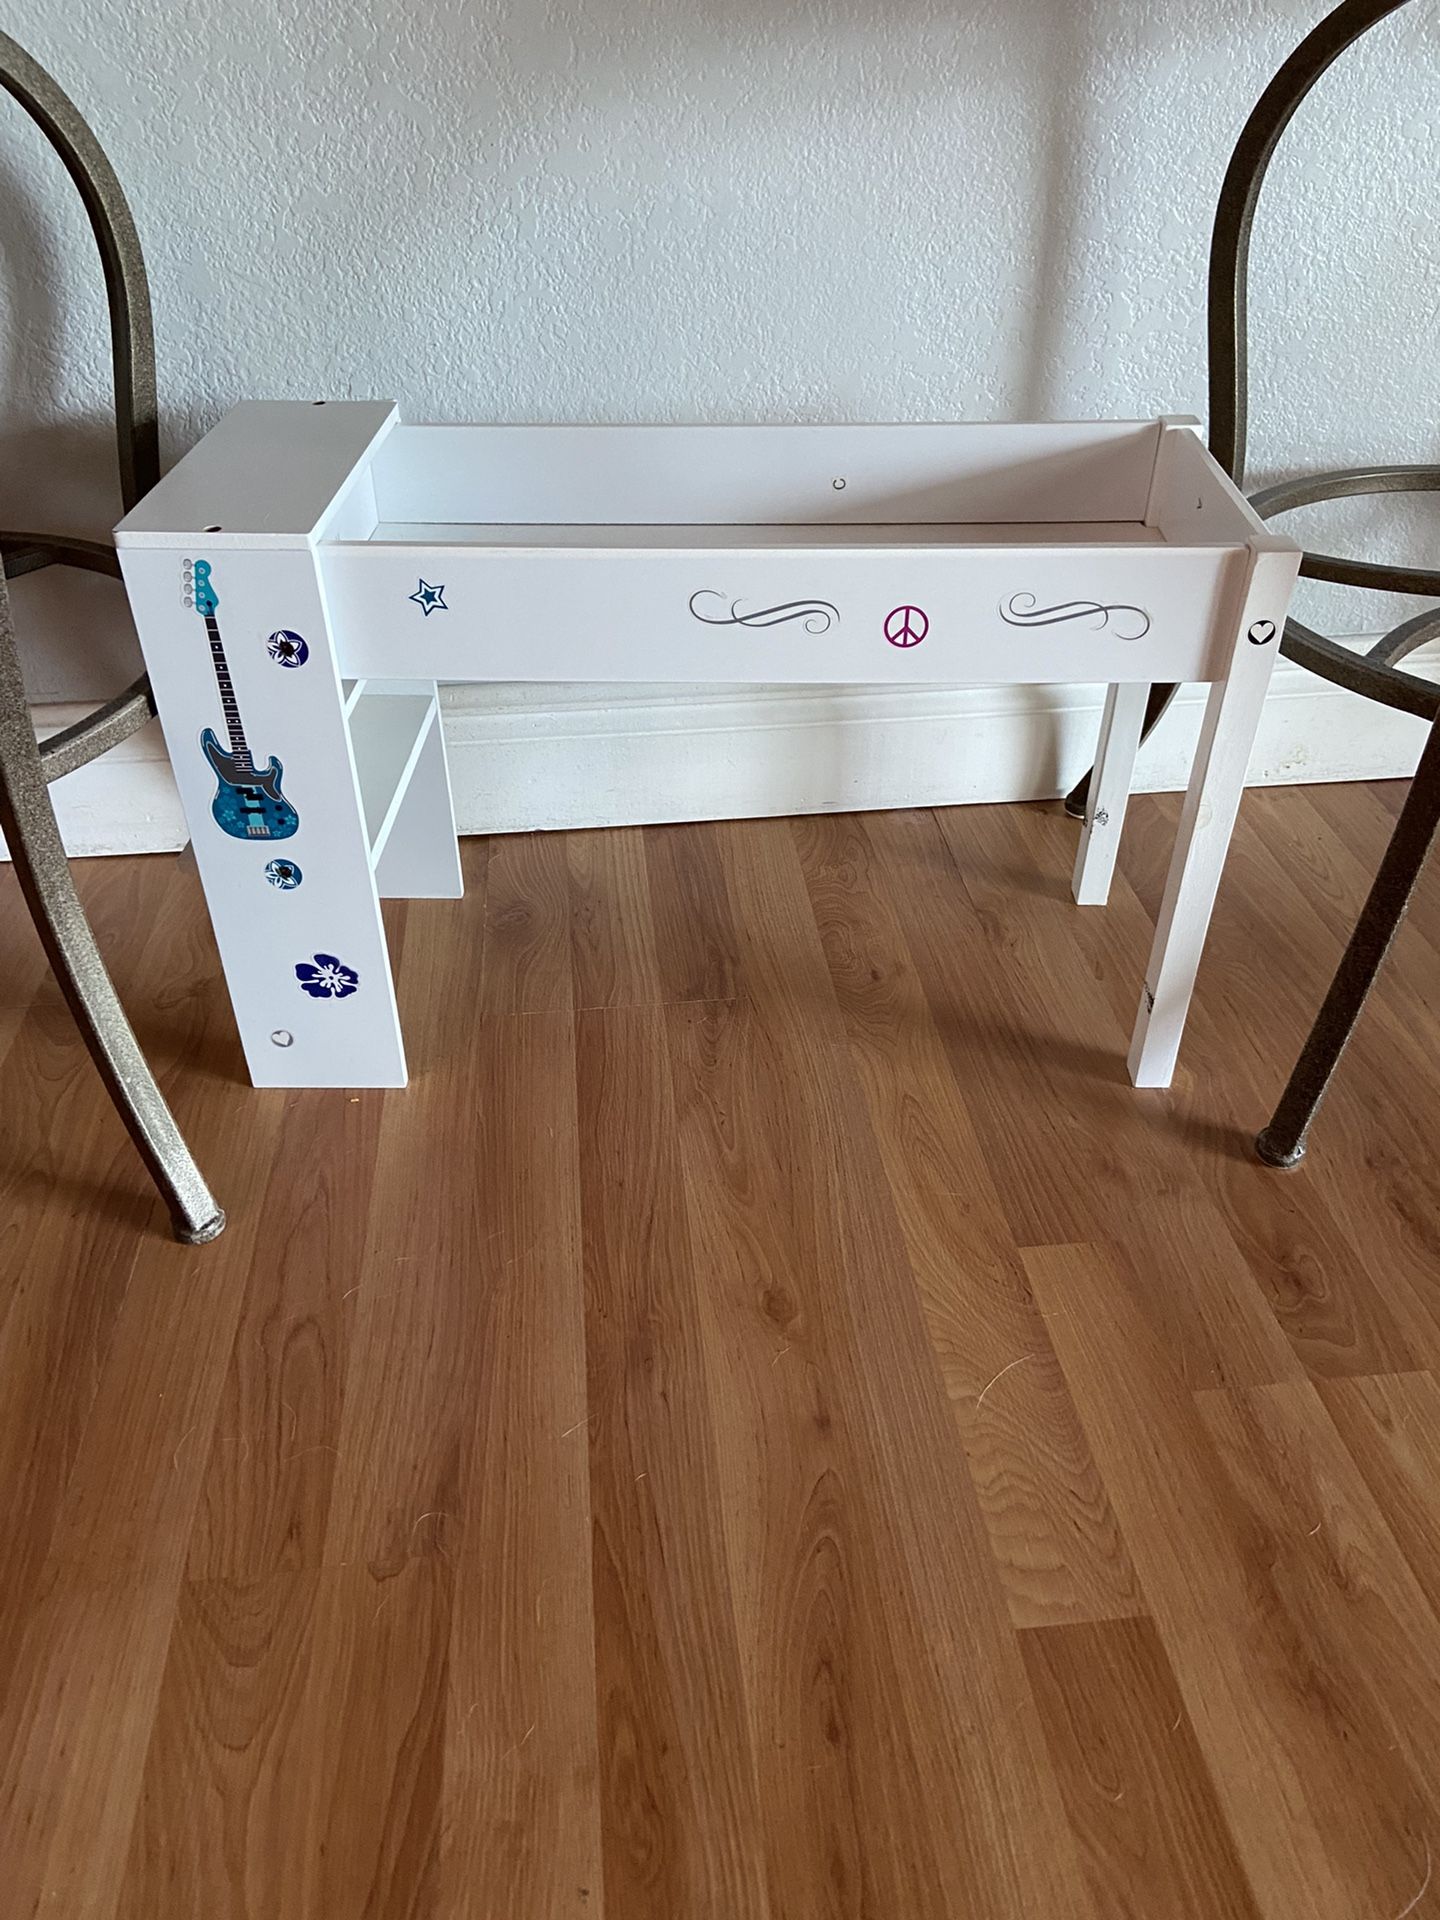 American Girl Doll Bed 